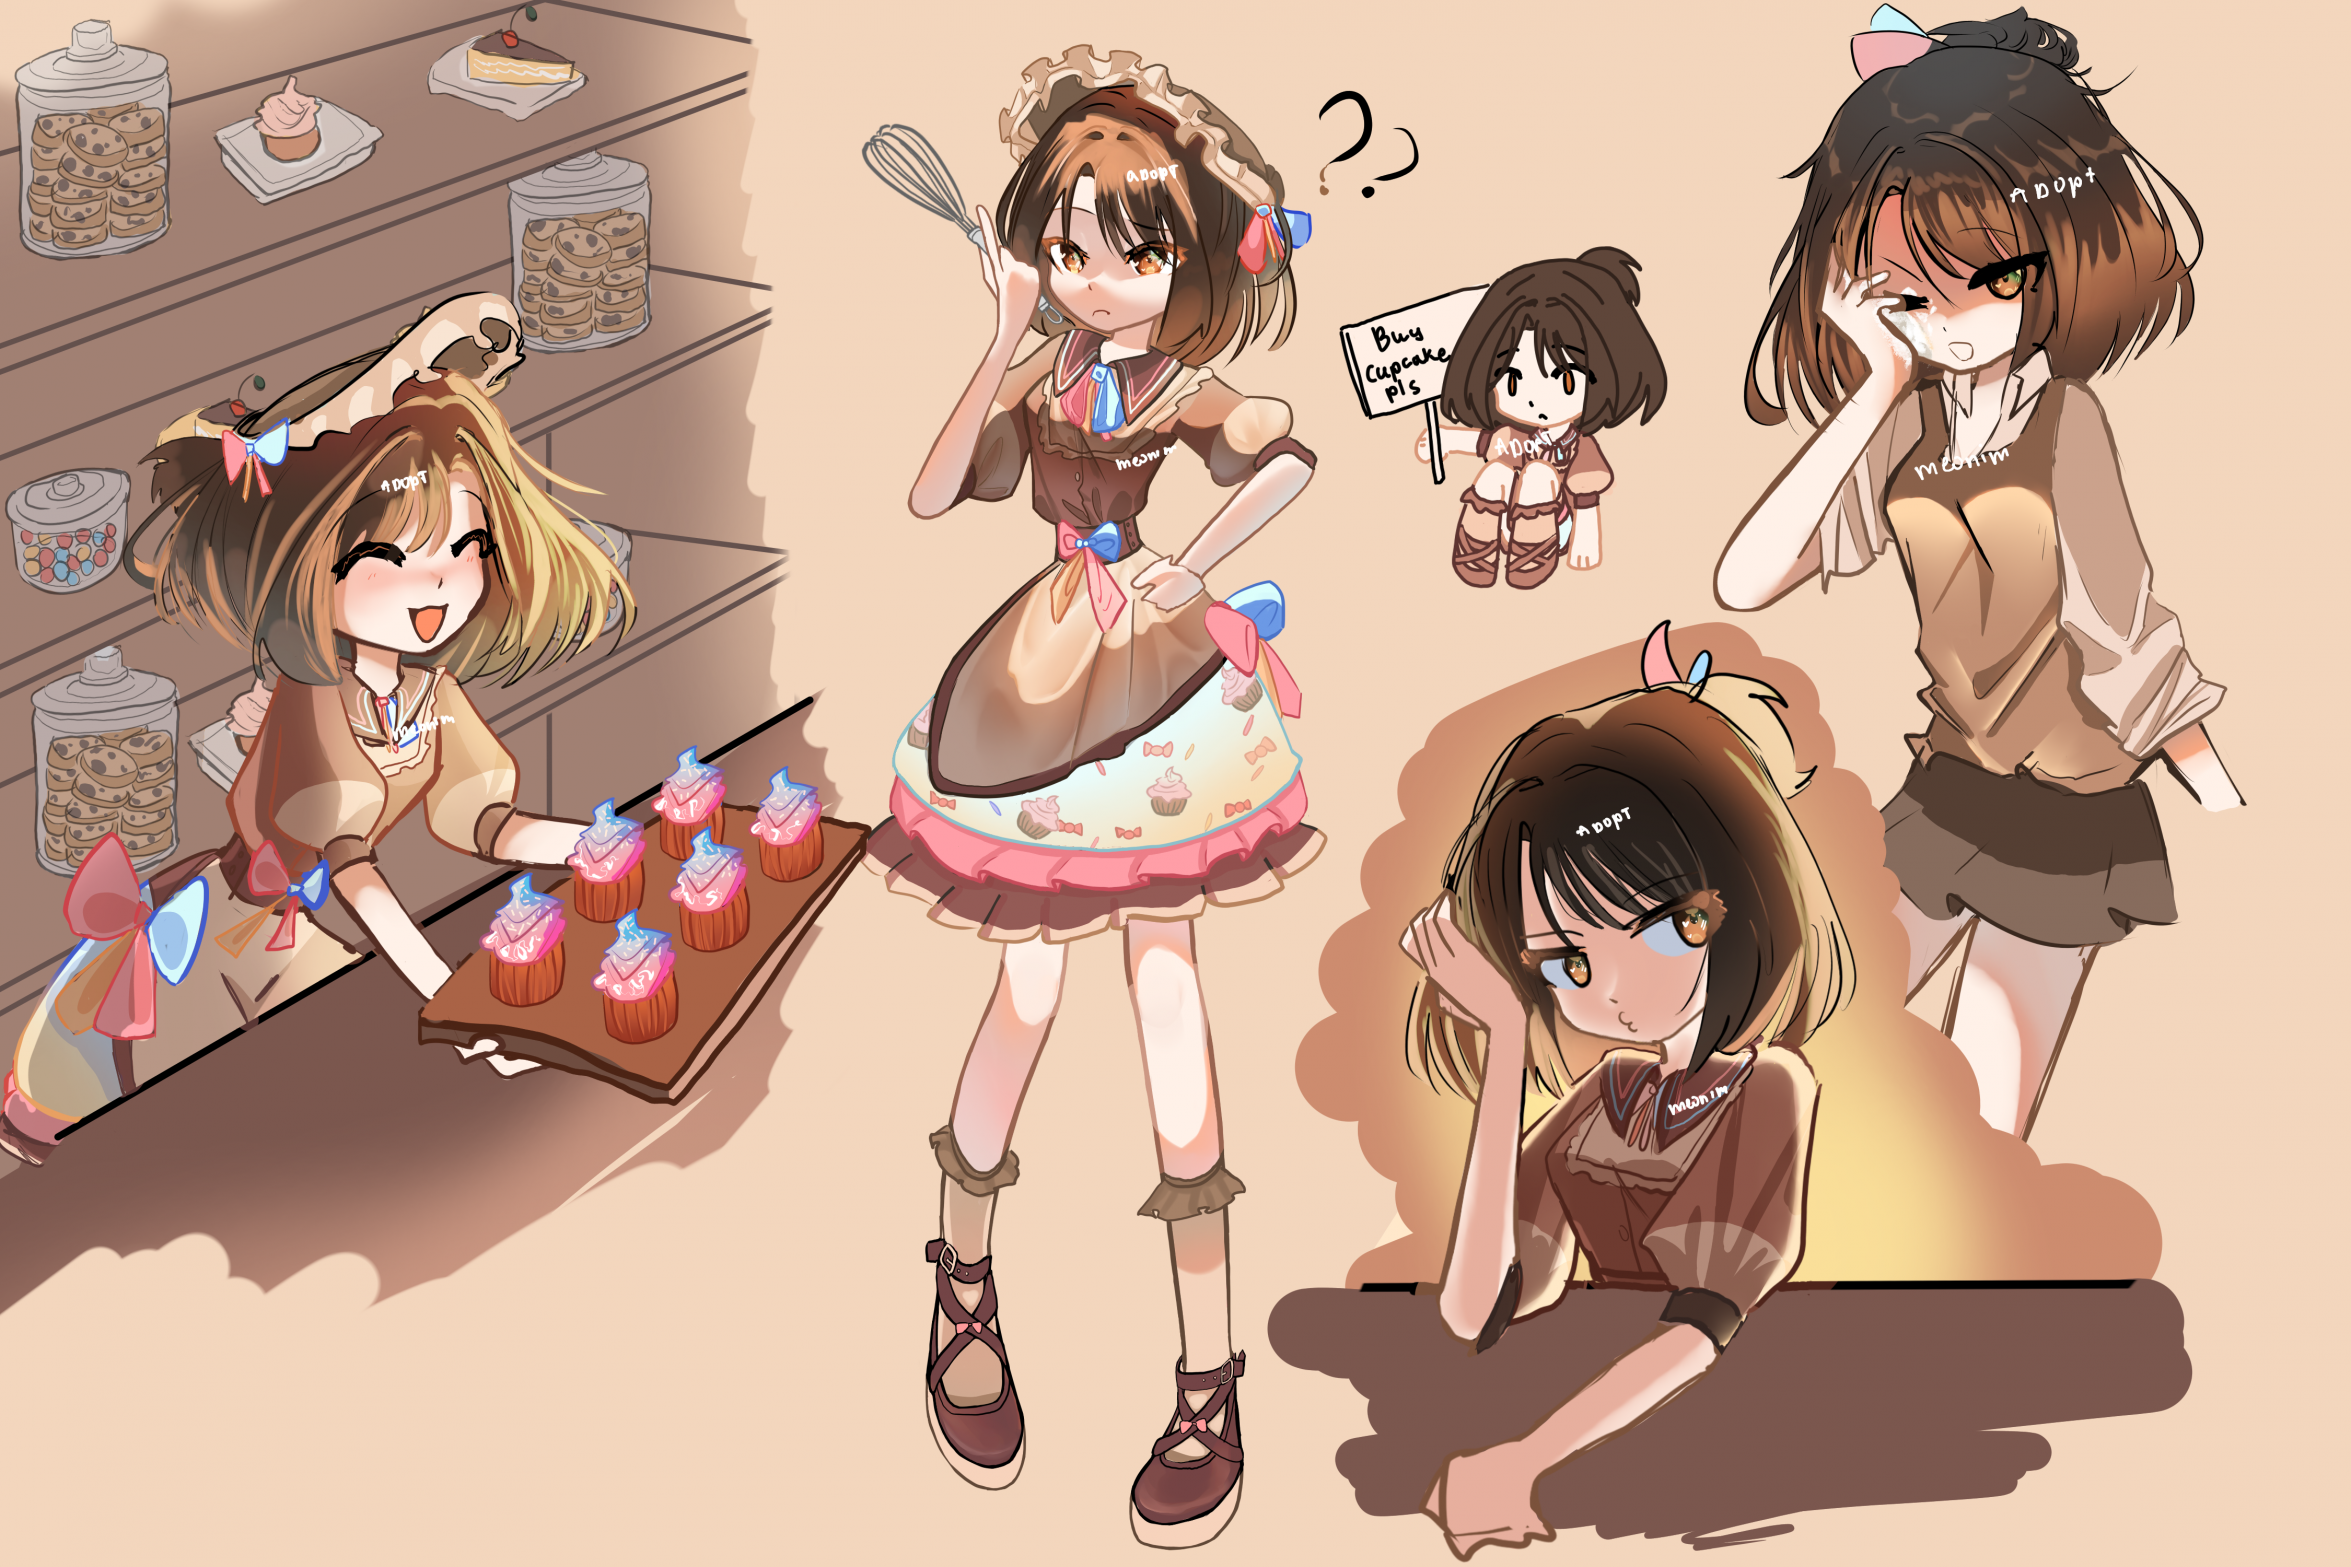 Z23] and [Ayanami] at the bakery! | Anime, Friend anime, Anime girl